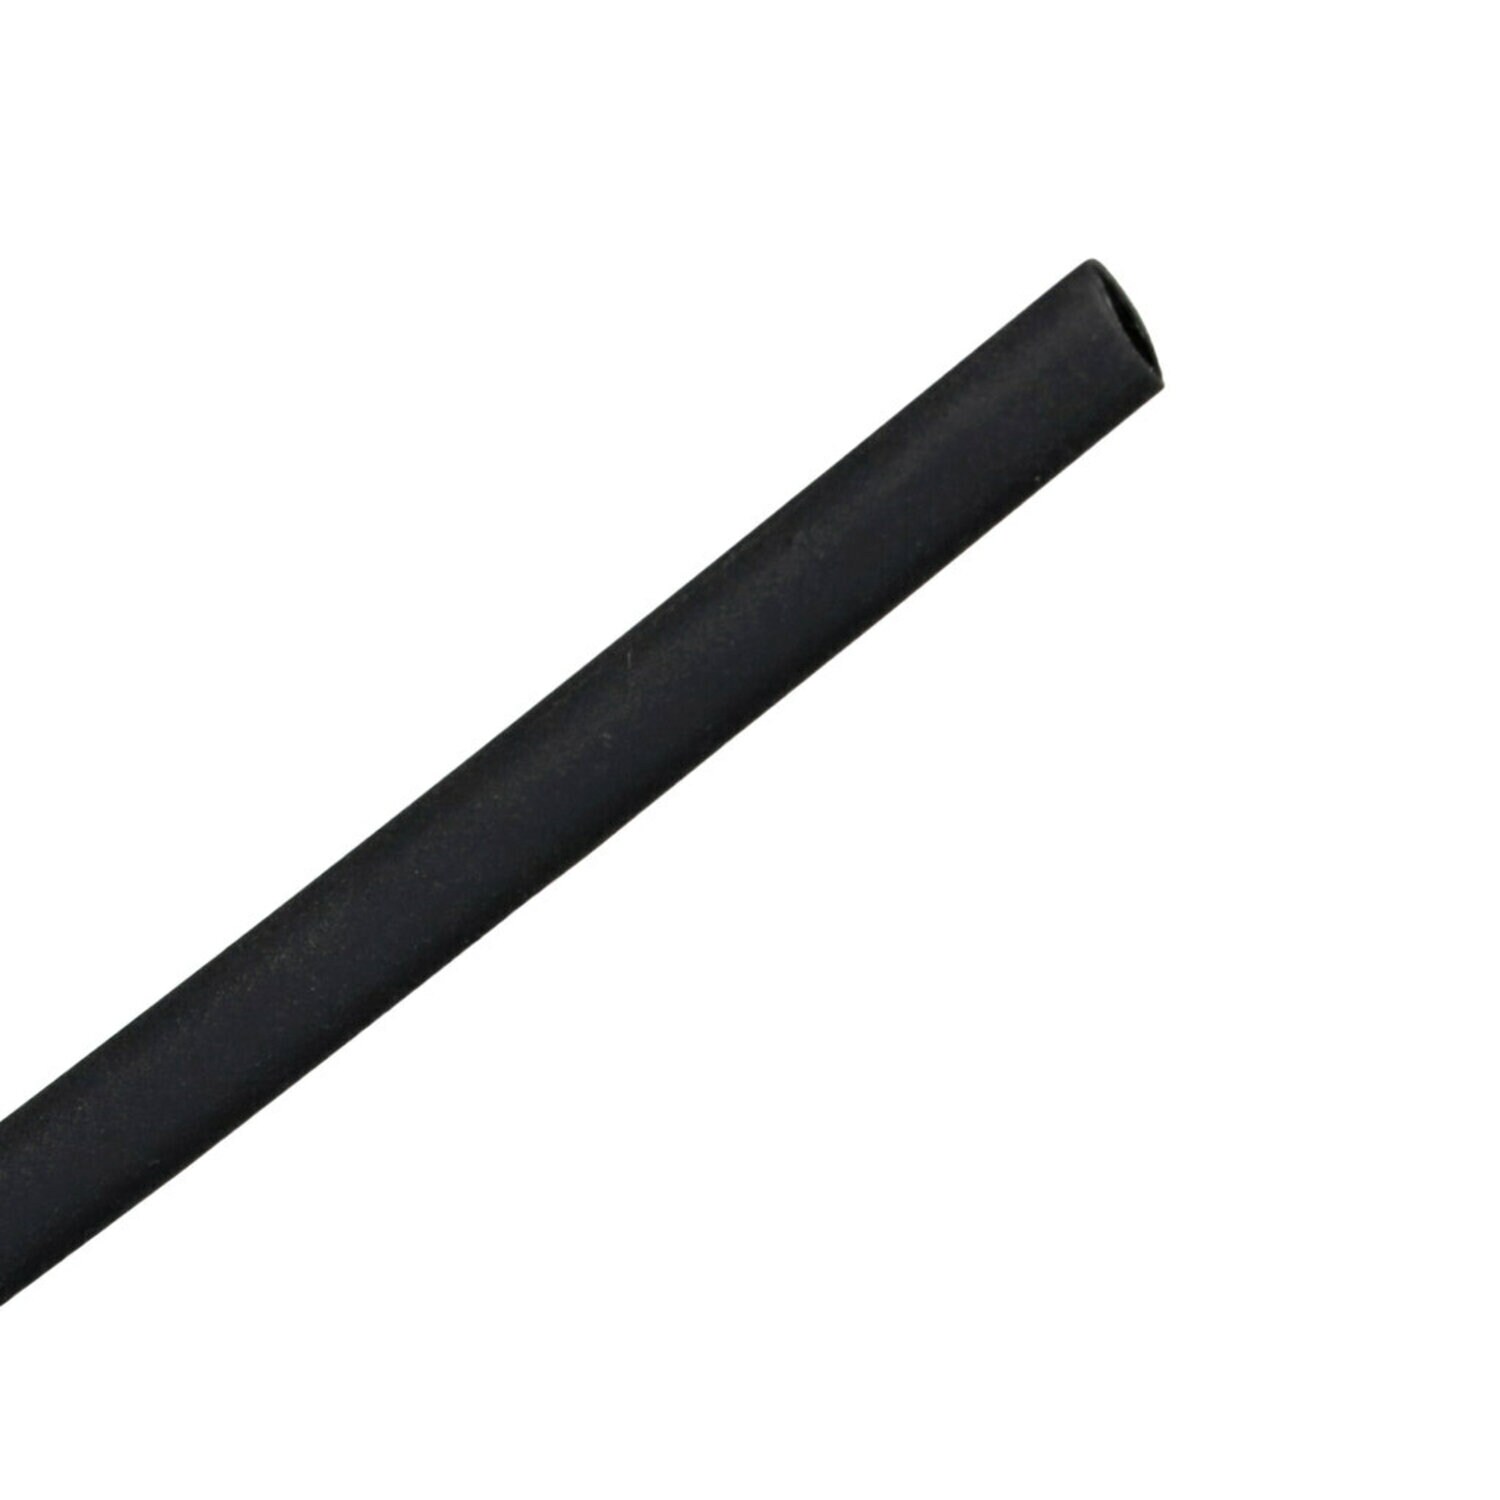 7100066097 - 3M Thin-Wall Heat Shrink Tubing EPS-300, Adhesive-Lined,
1/8-48"-Black-250 Pcs, 48 in length sticks, 250 pieces/case